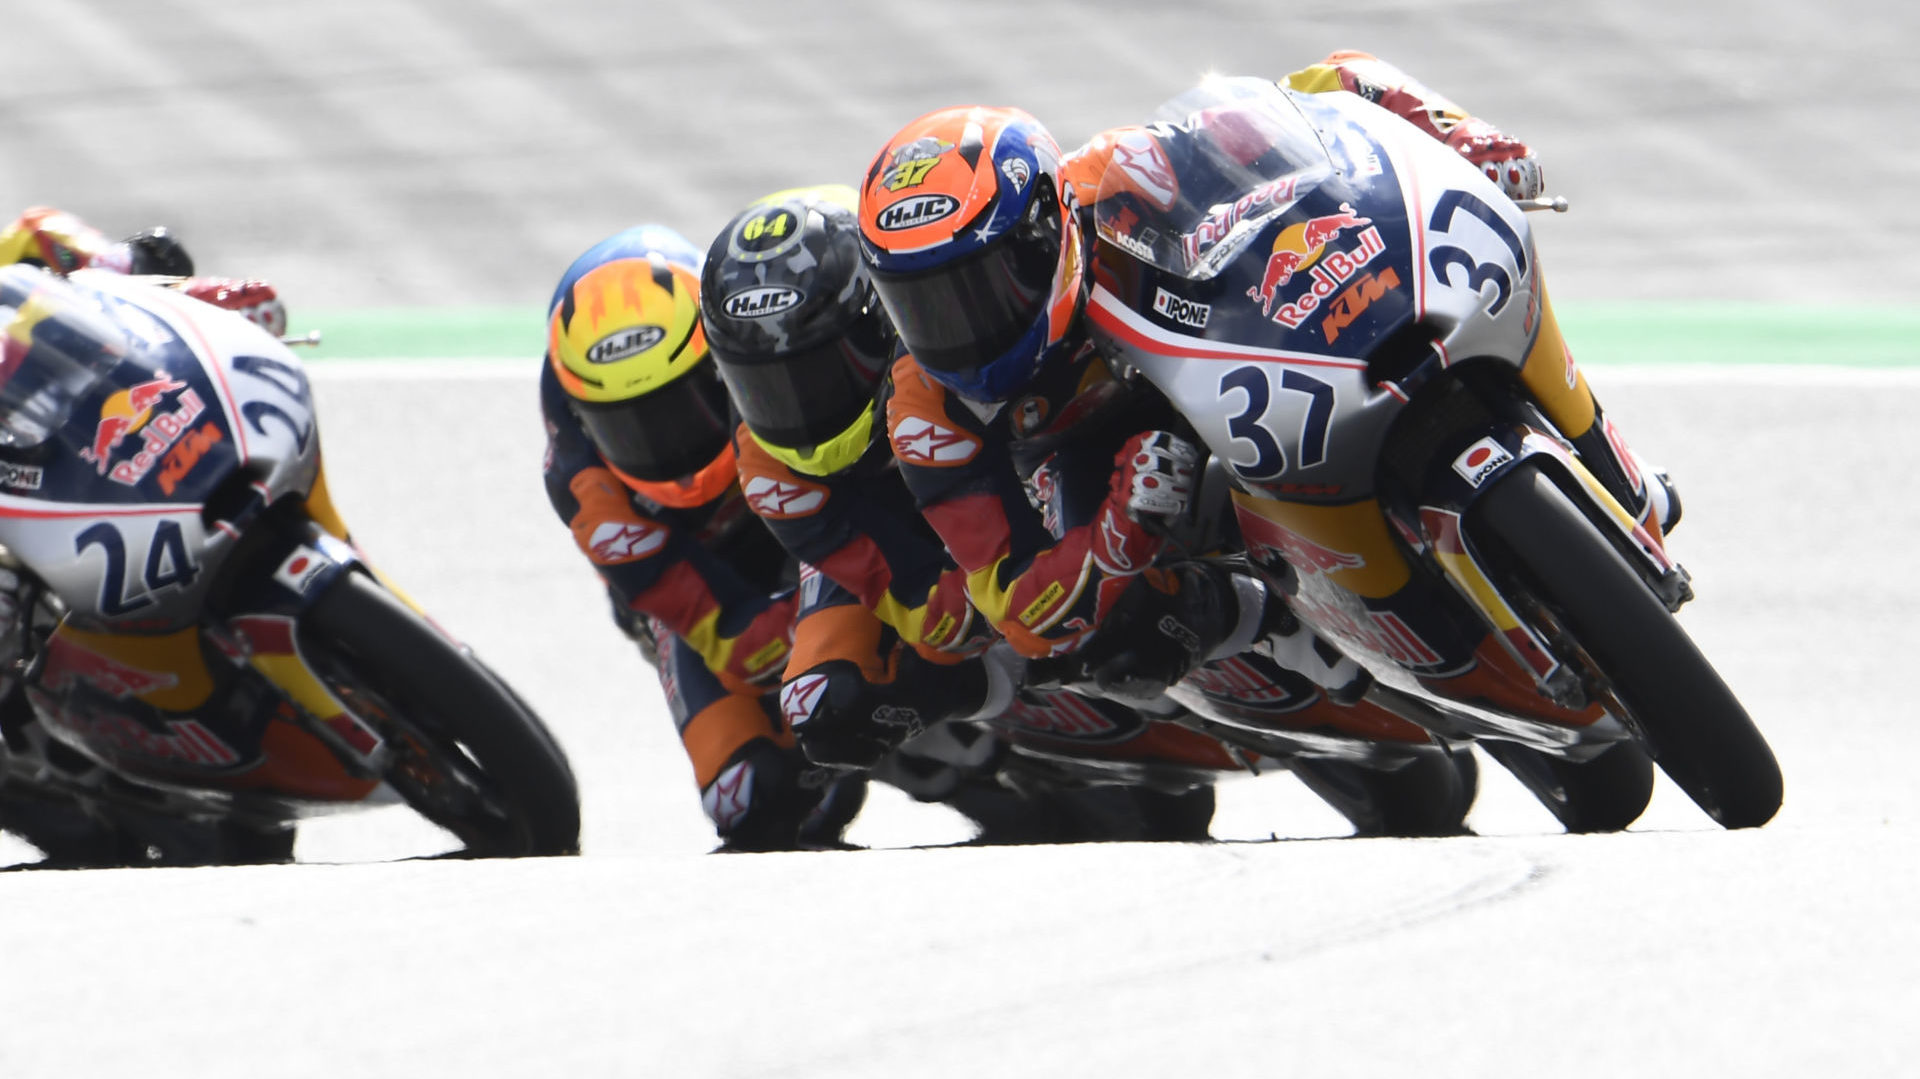 Pedro Acosta (37) leading a group of Red Bull MotoGP Rookies last weekend in Austria. Photo courtesy Red Bull.